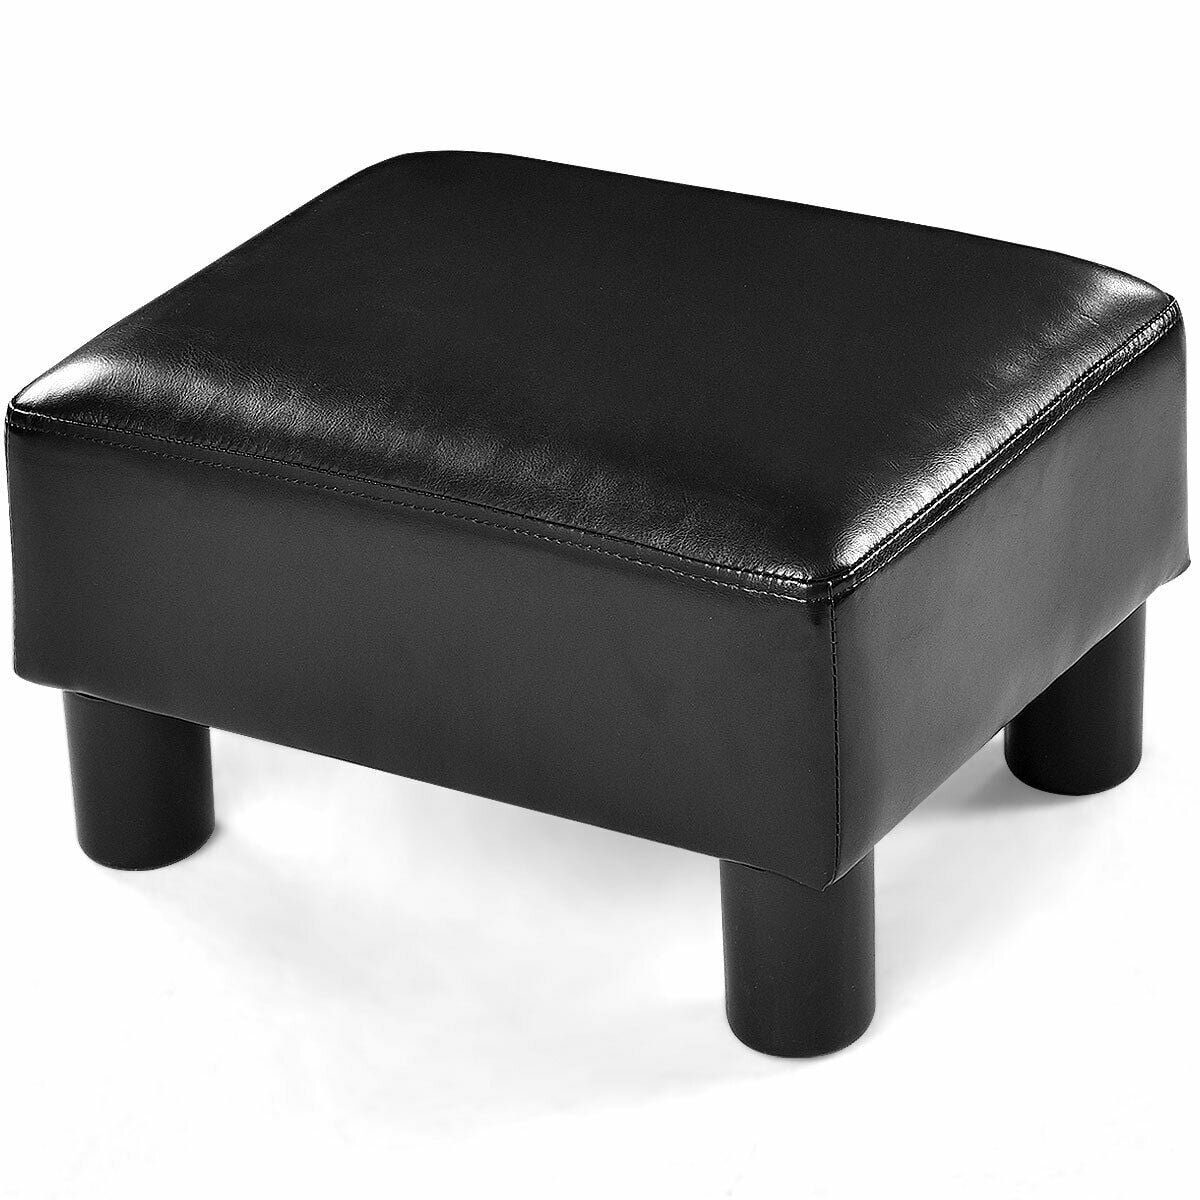 ECOTOUGE Foot Stool Ottoman PU Leather Foot Rest for Chair Low Small Ottoman Modern Upholstered Rectangle Seat Chair Footstool Black